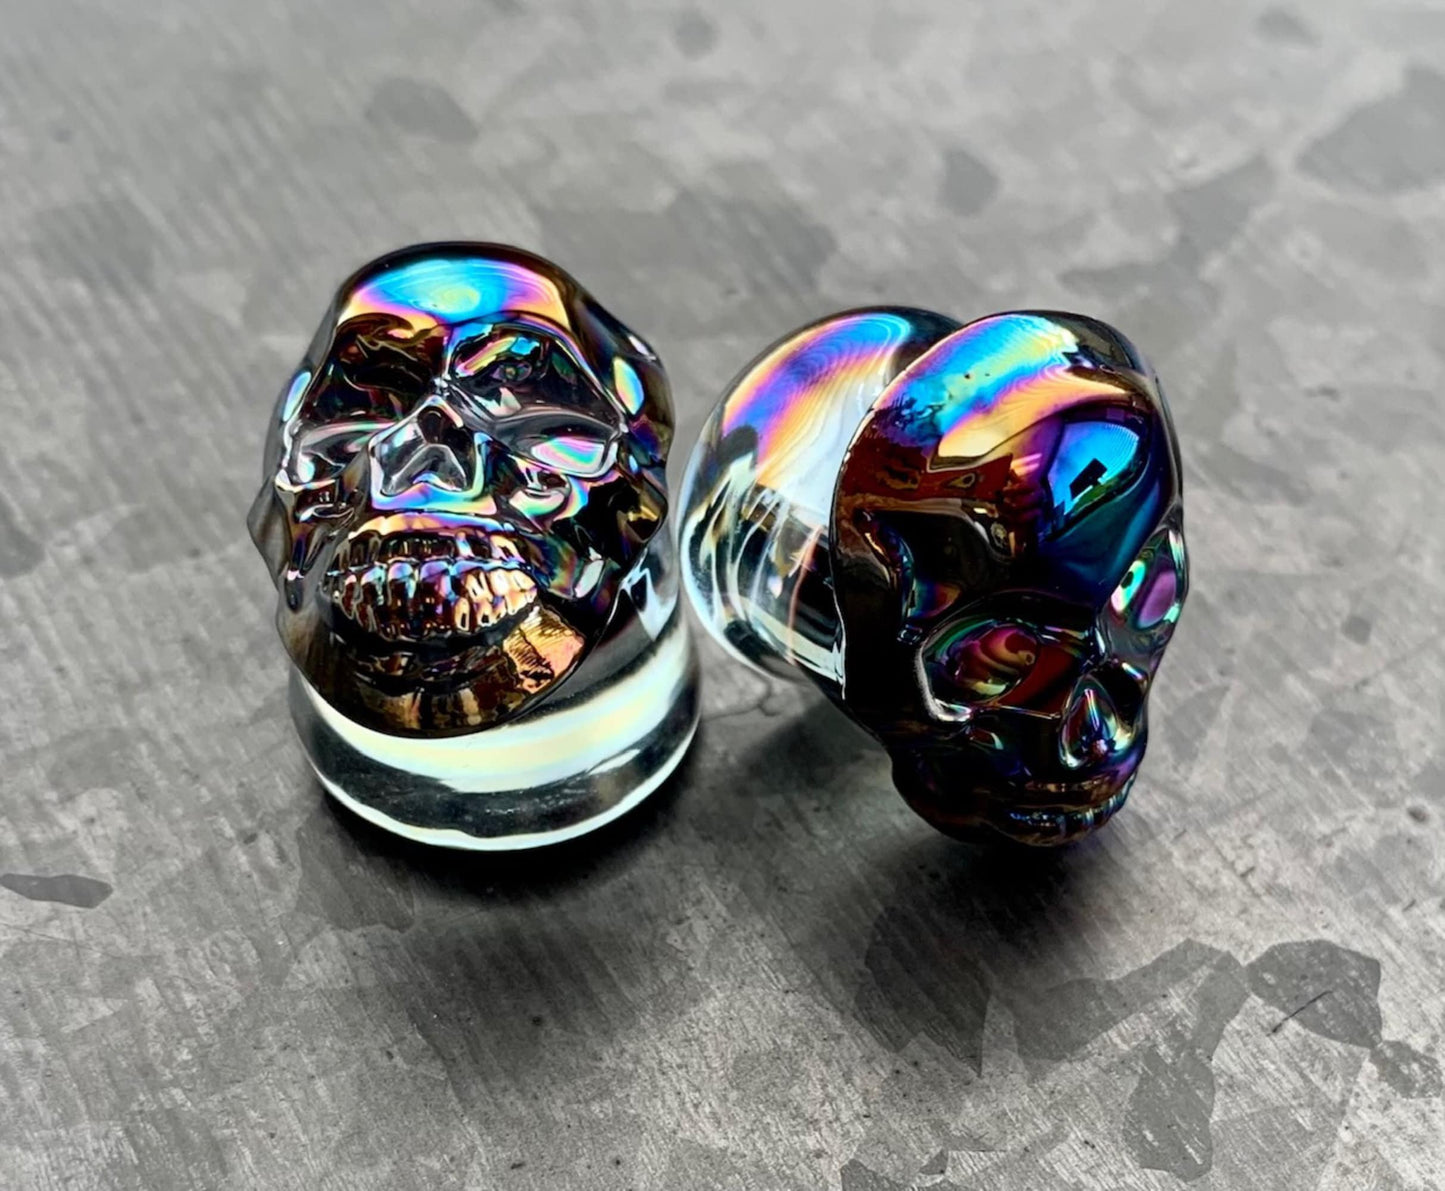 PAIR of Unique Skull Pyrex Glass Double Flare Plugs/Tunnels - Gauges 2g (6mm) through 5/8" (16mm) available - Choose multi-color or black!